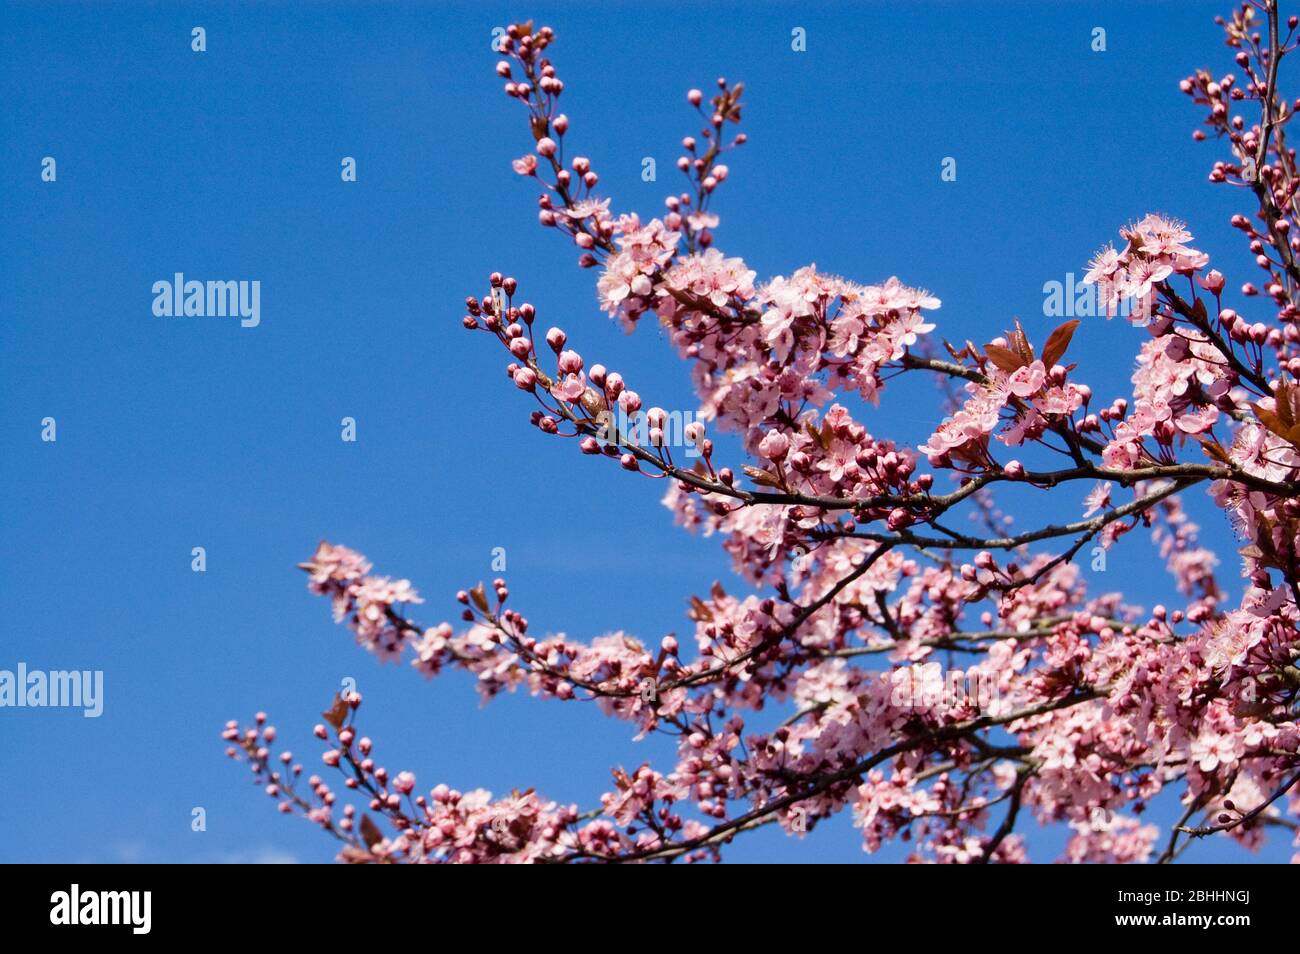 Branches of a flowering cherry tree Prunus serrulata bursting with pink blooms in the Spring sunshine. Stock Photo